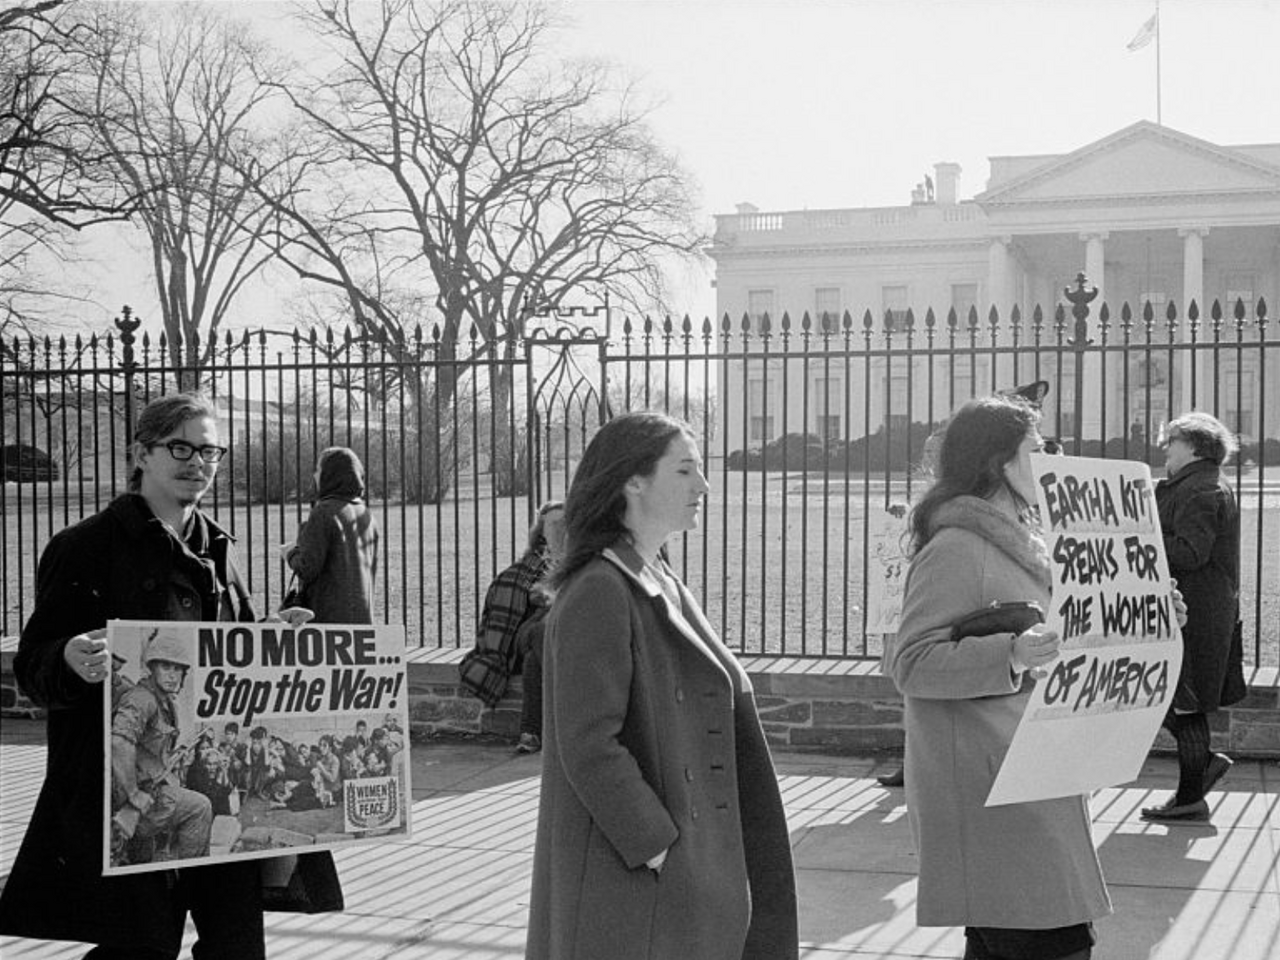 A photograph of anti-Vietnam War demonstrators carrying signs, "No more...Stop the war!", "Eartha Kitt speaks for the women of America", and "Stop the draft", picketing in front of the White House.